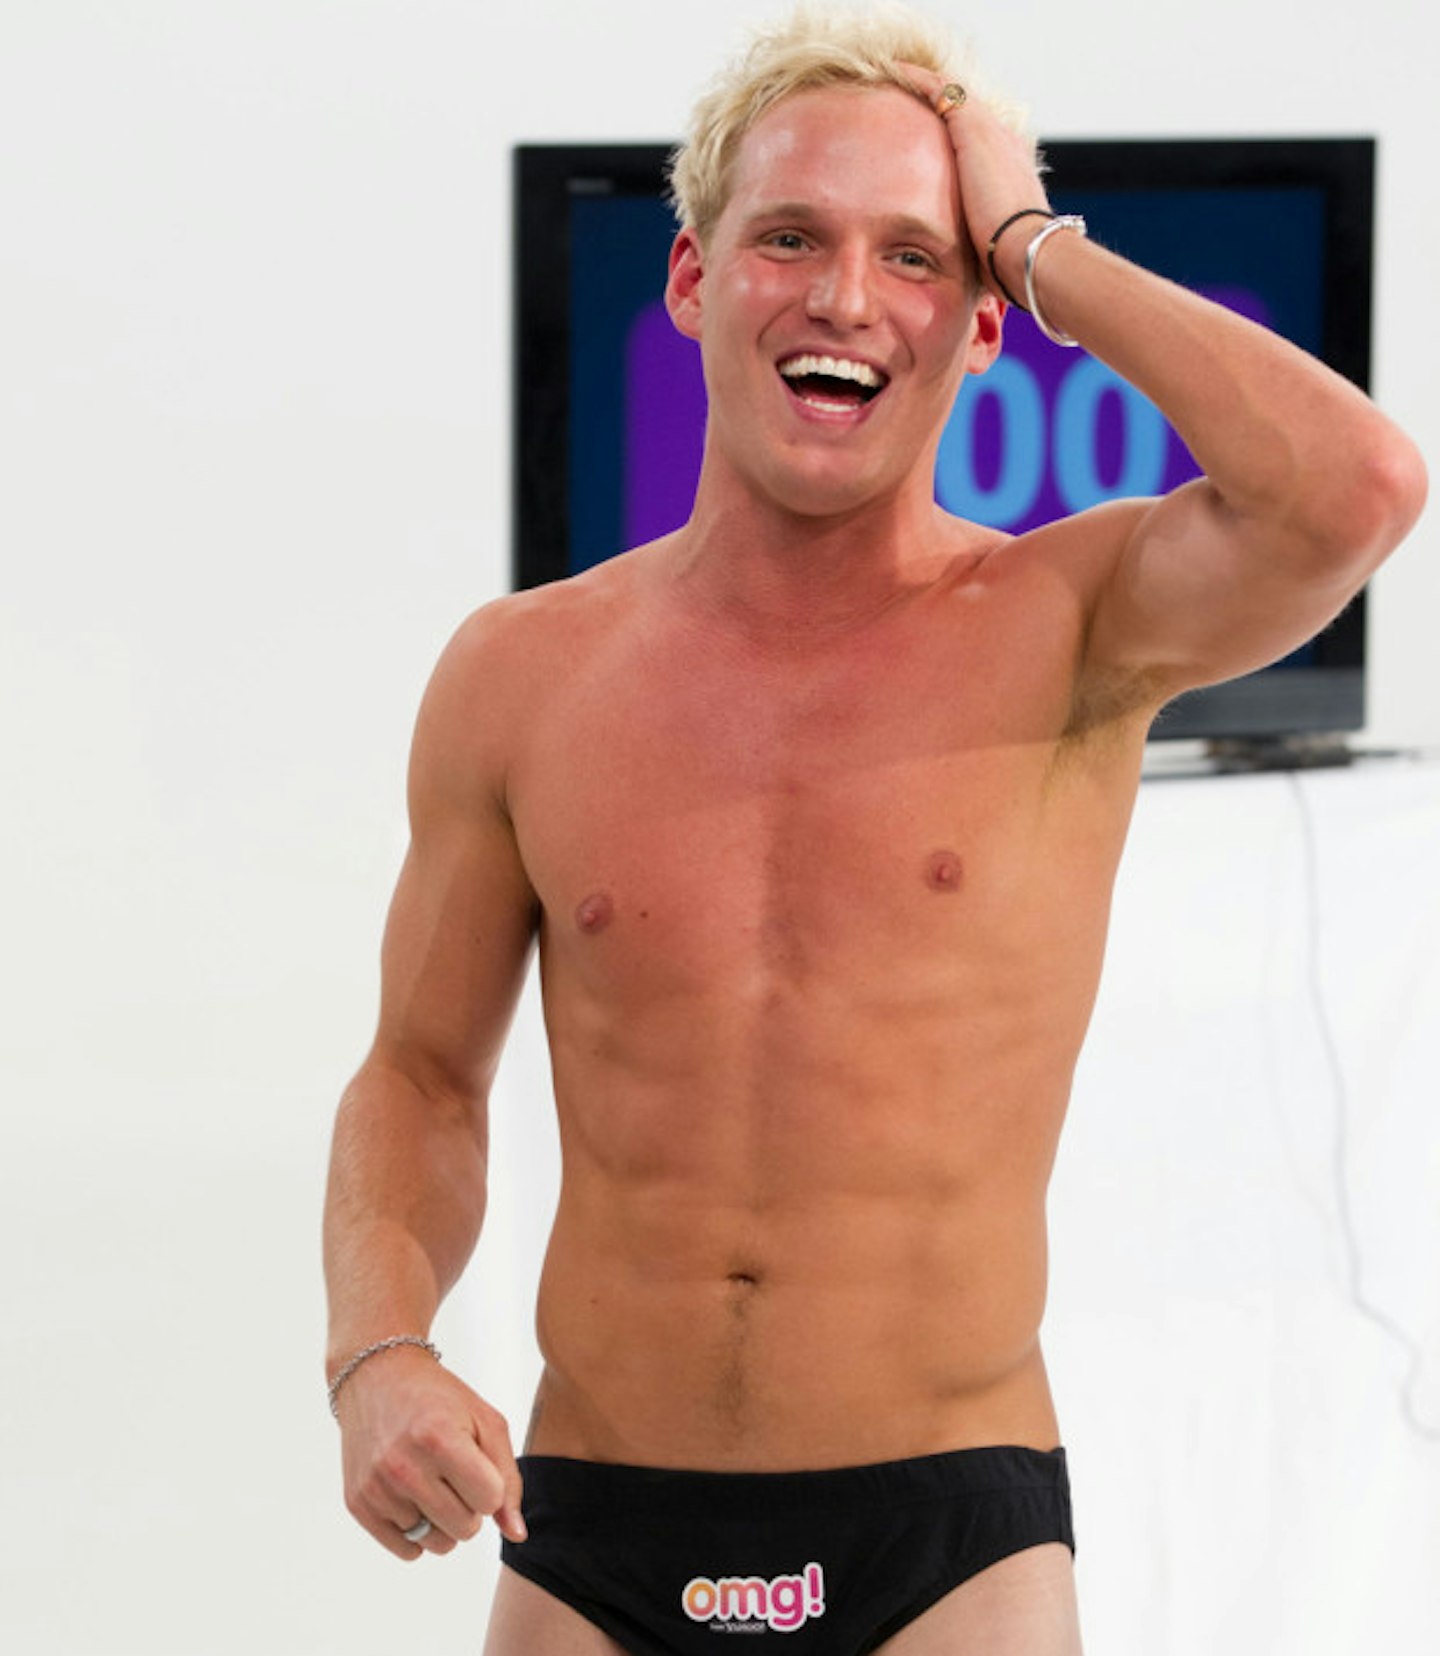 Jamie Laing getting ready for a dip